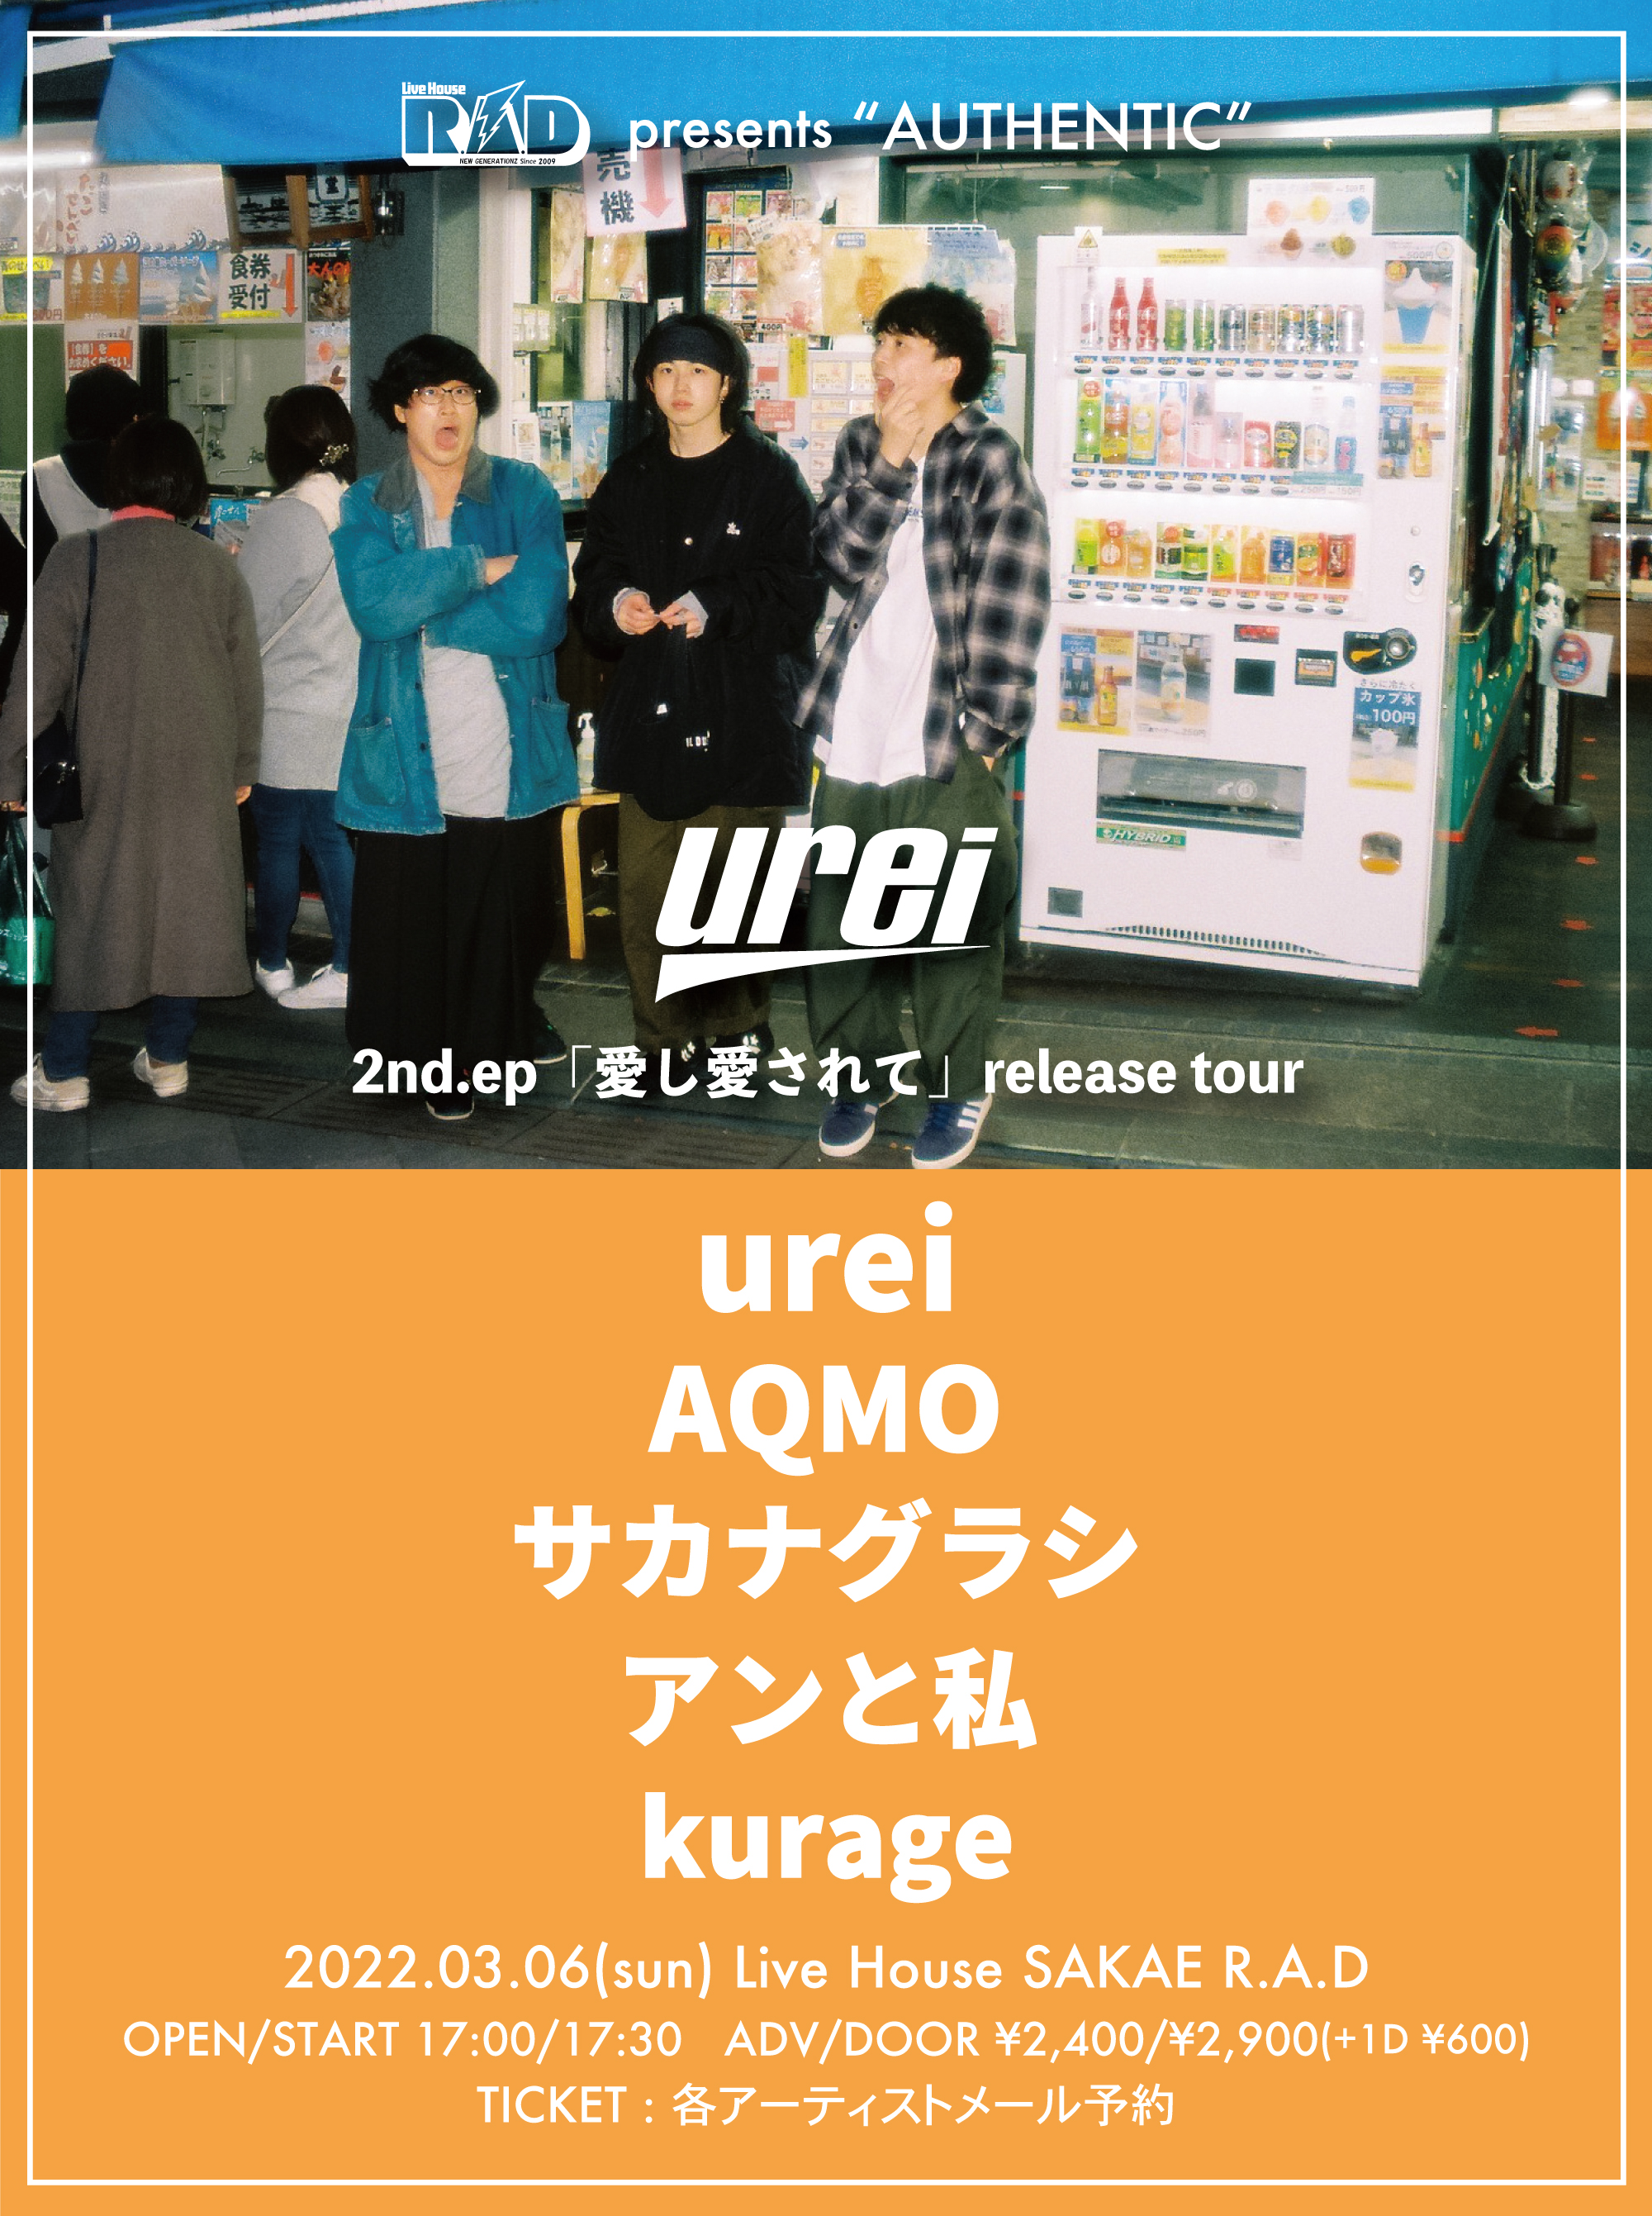 R.A.D presents "AUTHENTIC" urei 2nd.EP「愛し愛されて」release tour